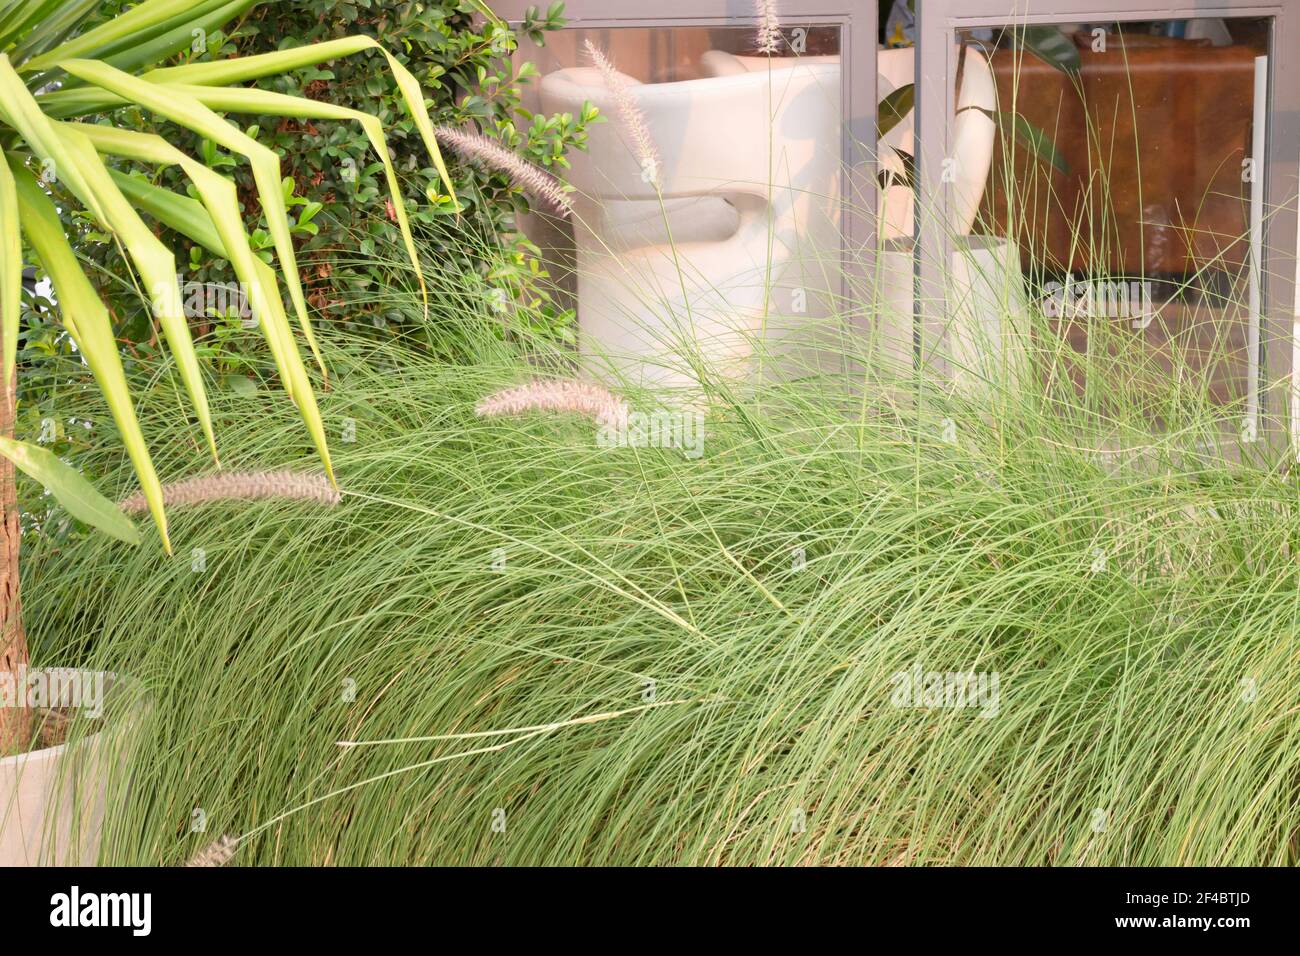 Green foxtail grass decorated in outdoor garden, stock photo Stock Photo